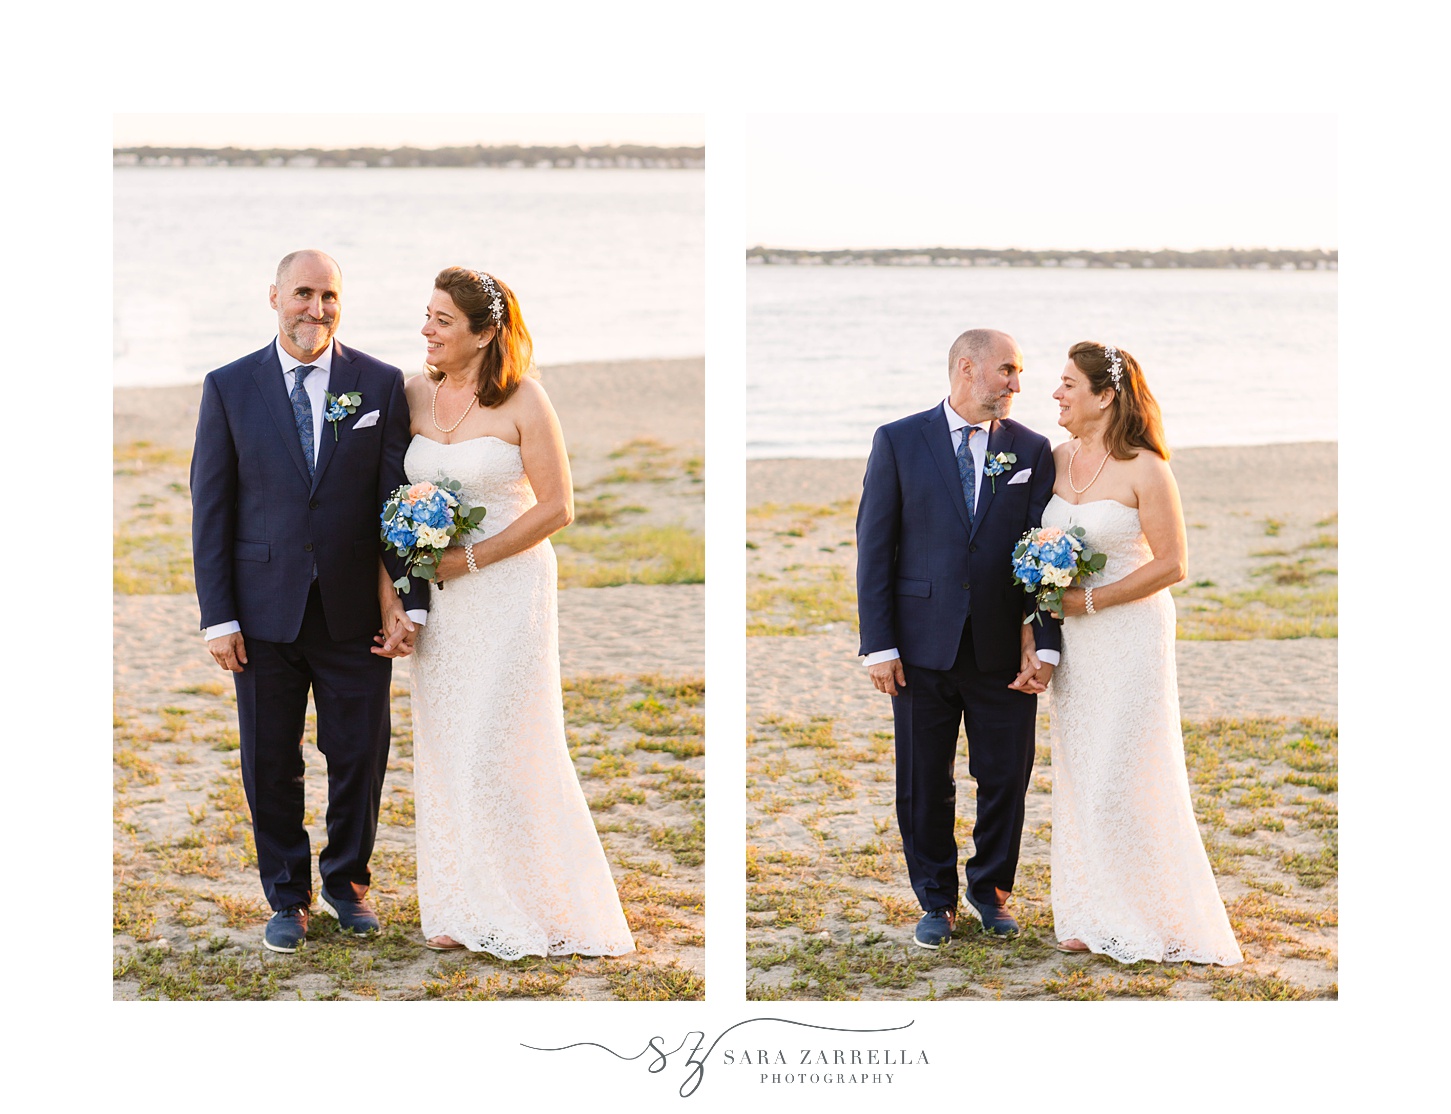 bride and groom pose on beach at sunset with Sara Zarrella Photography